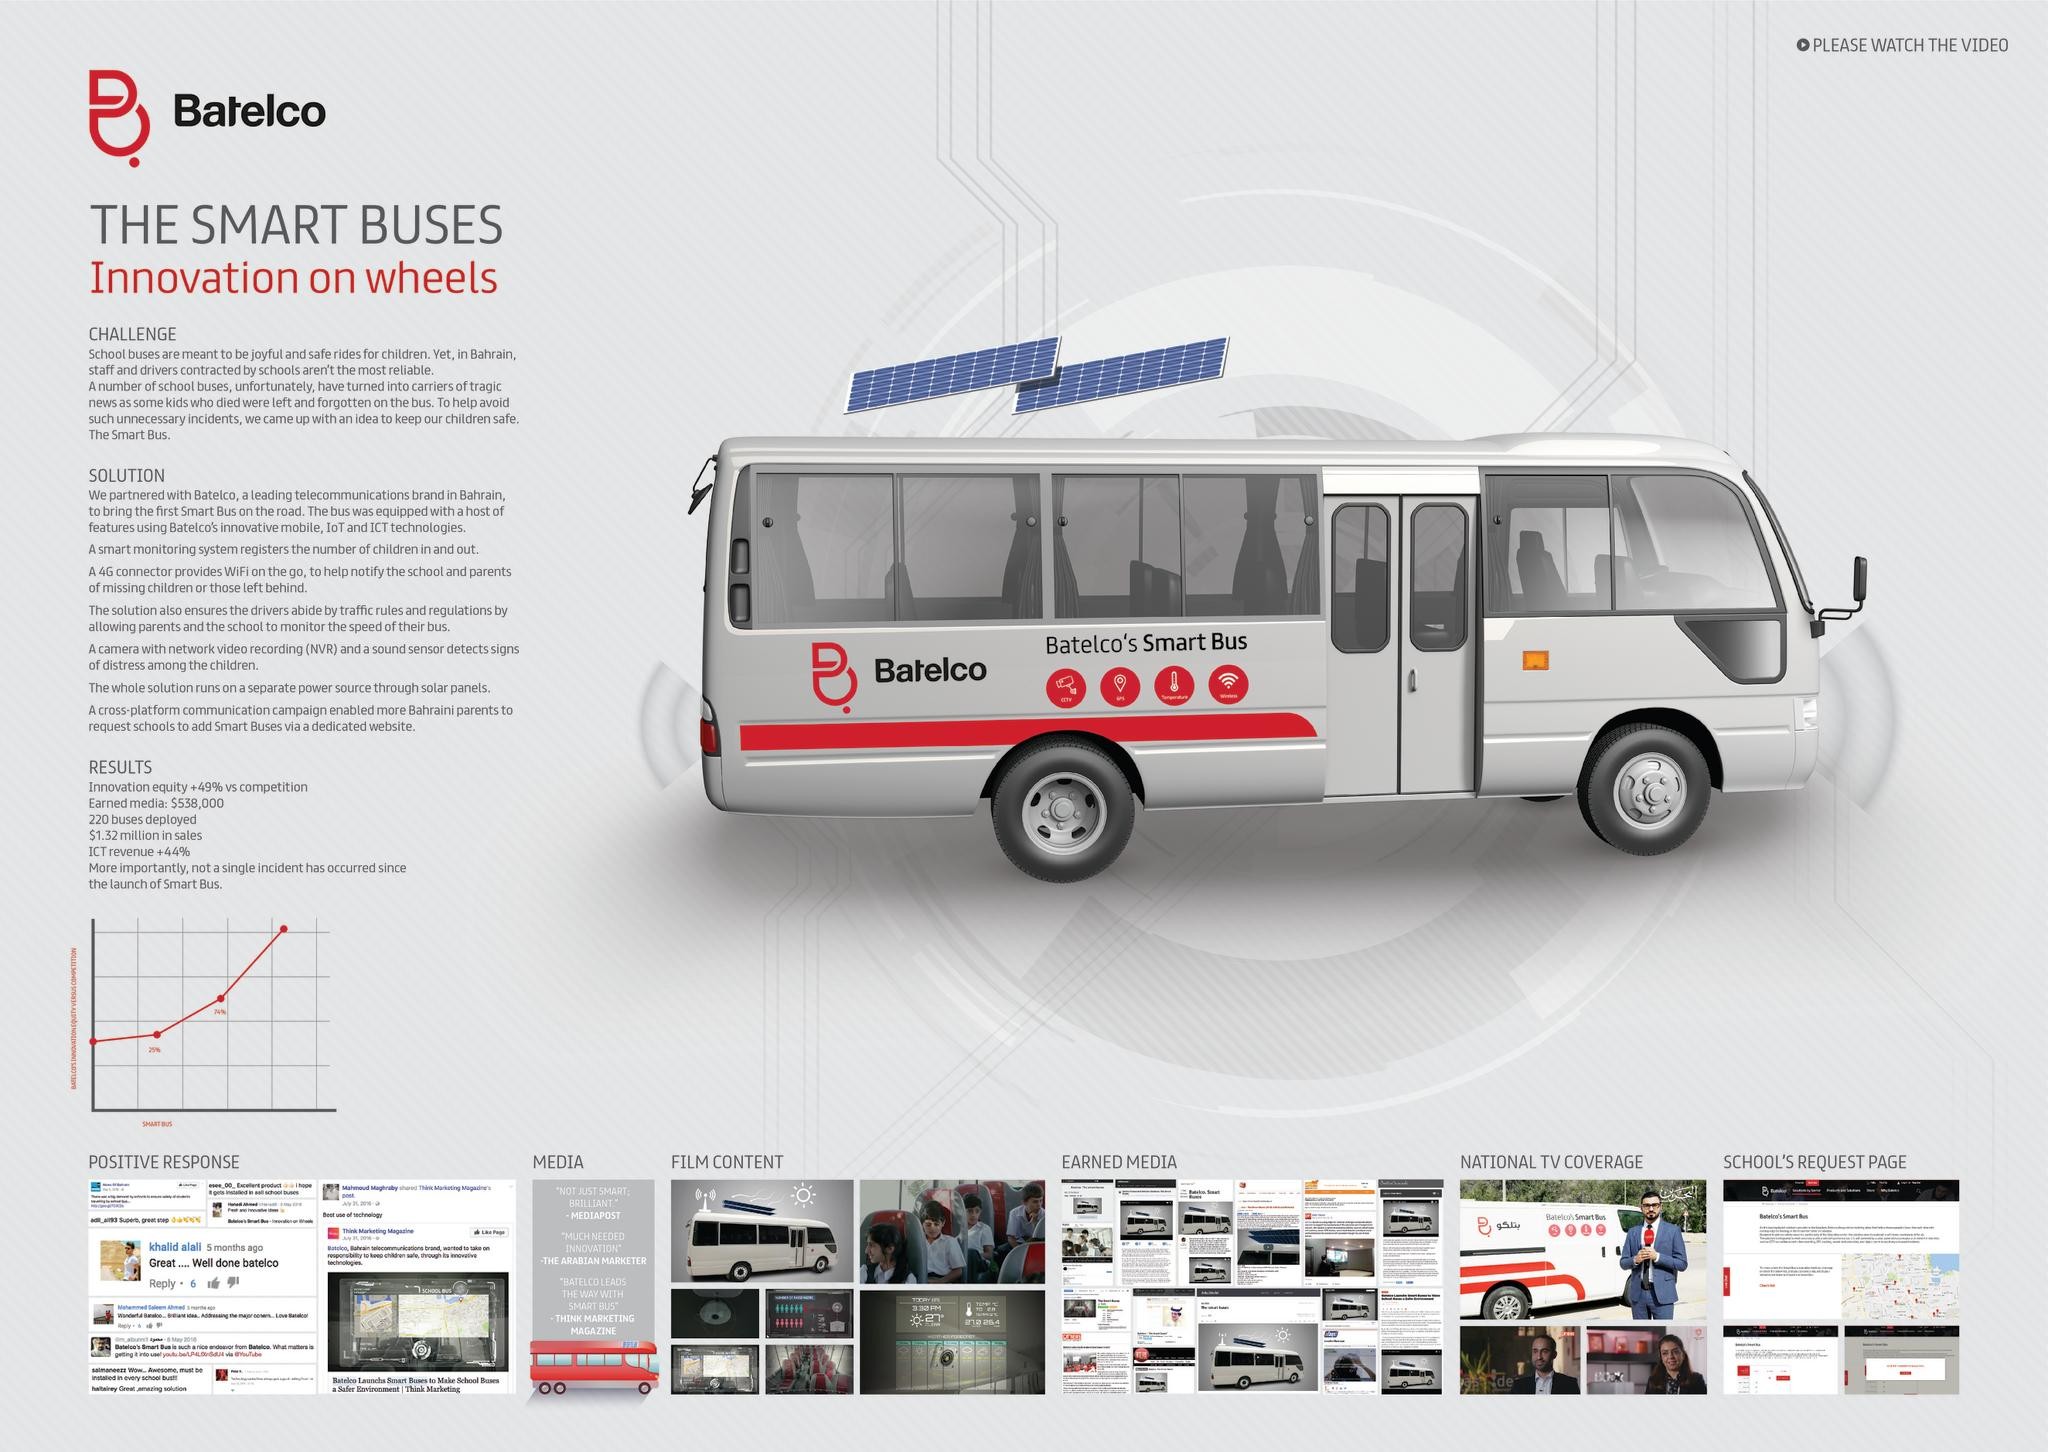 The Smart Bus